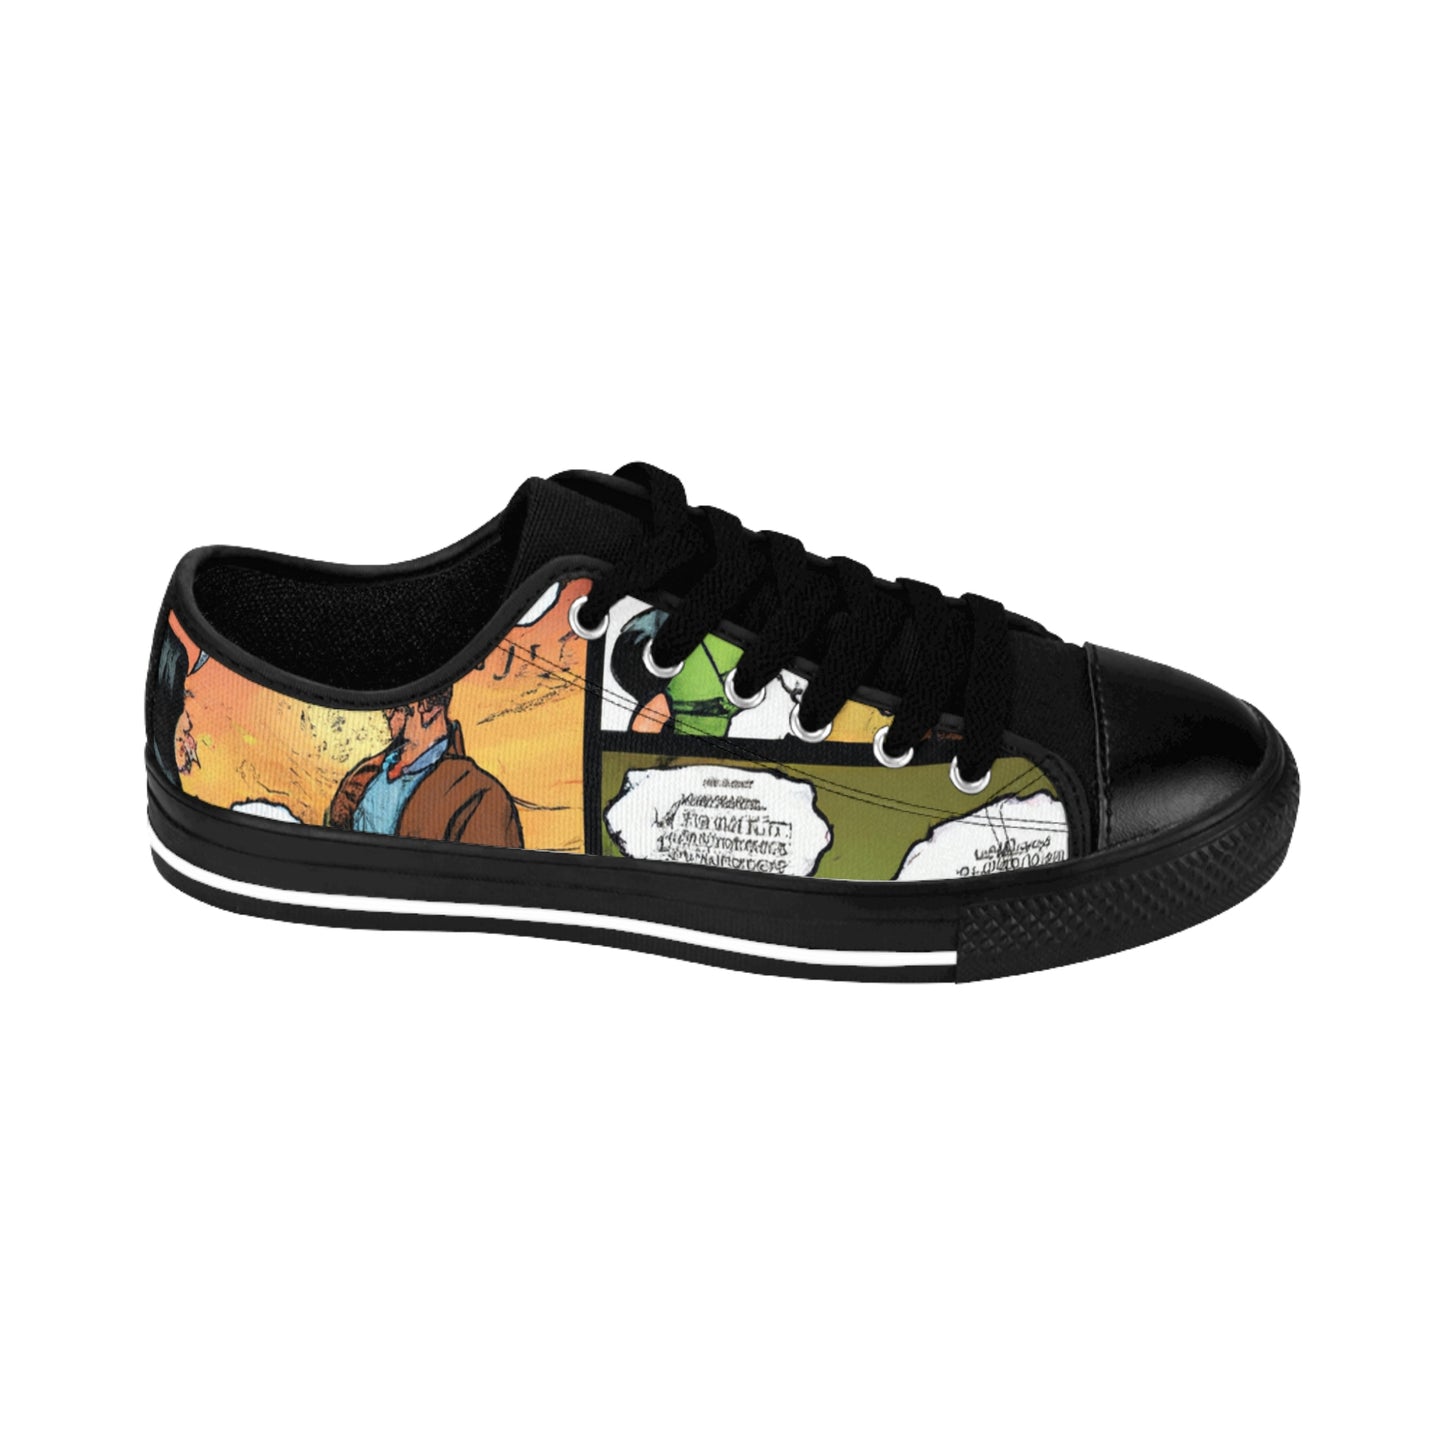 .

Gillianne the ShoeMaker - Comic Book Low Top